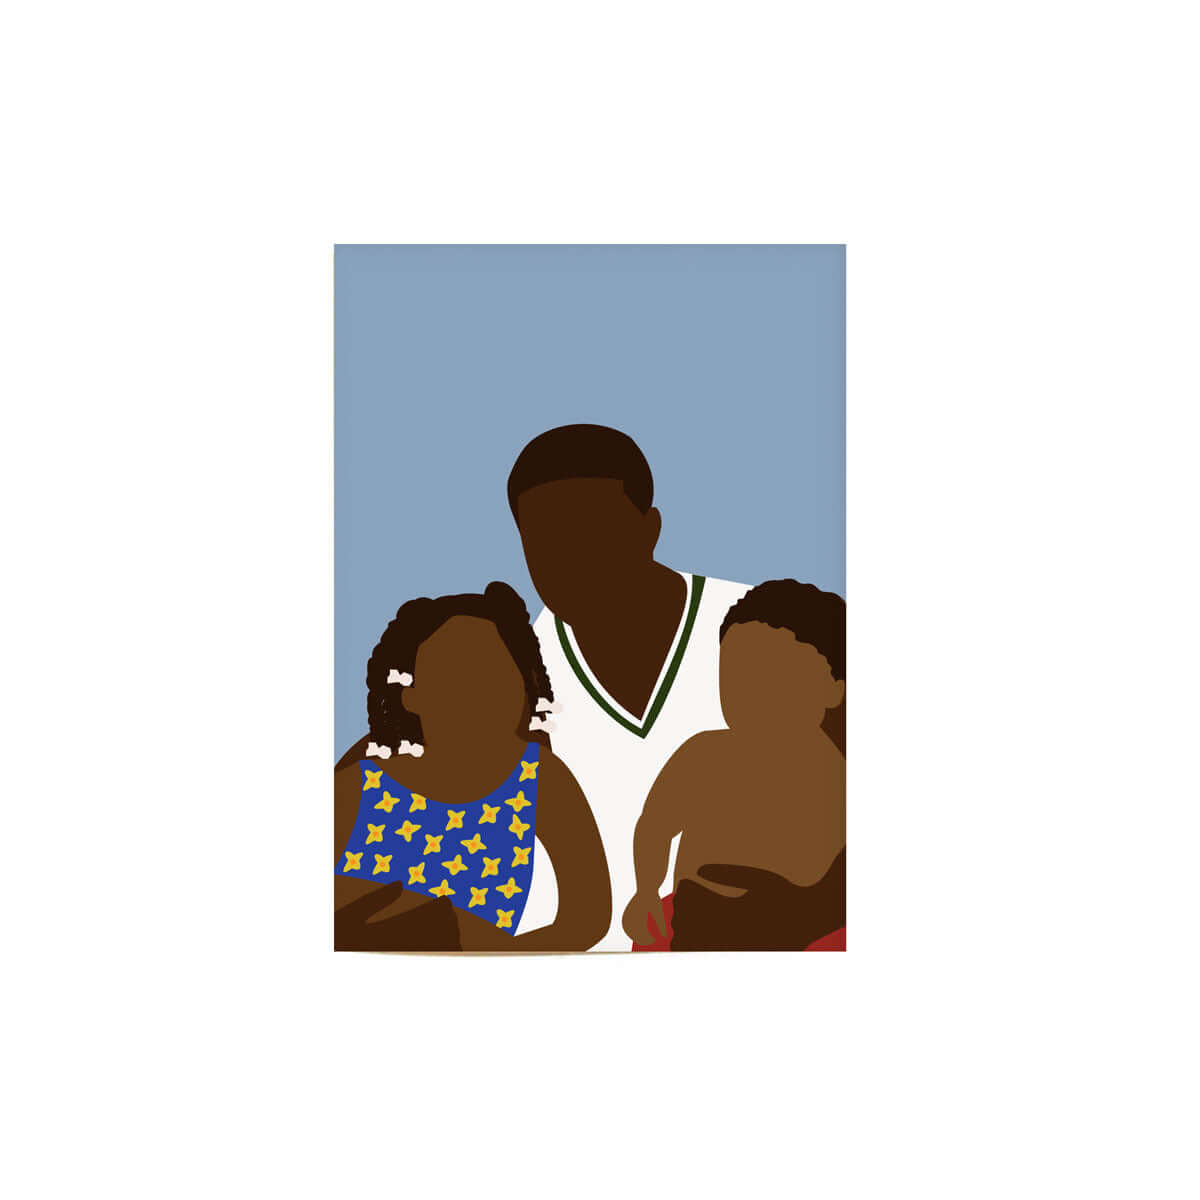 vertical kinfolk card number 3 that illustrates two small children pictured with their parent